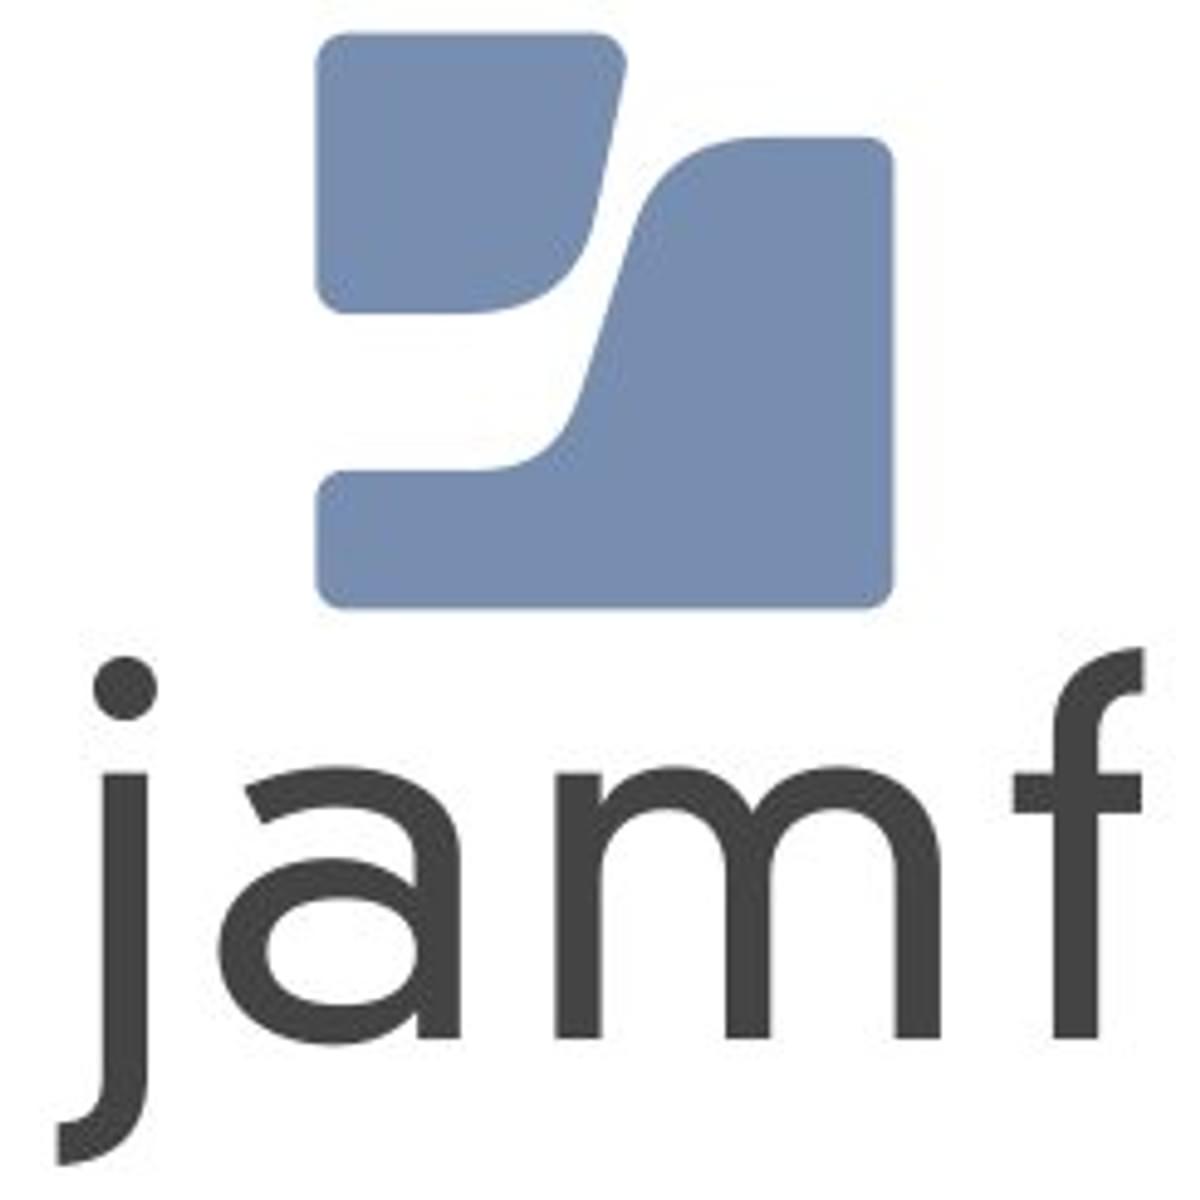 Jamf organiseert security event over trusted access image